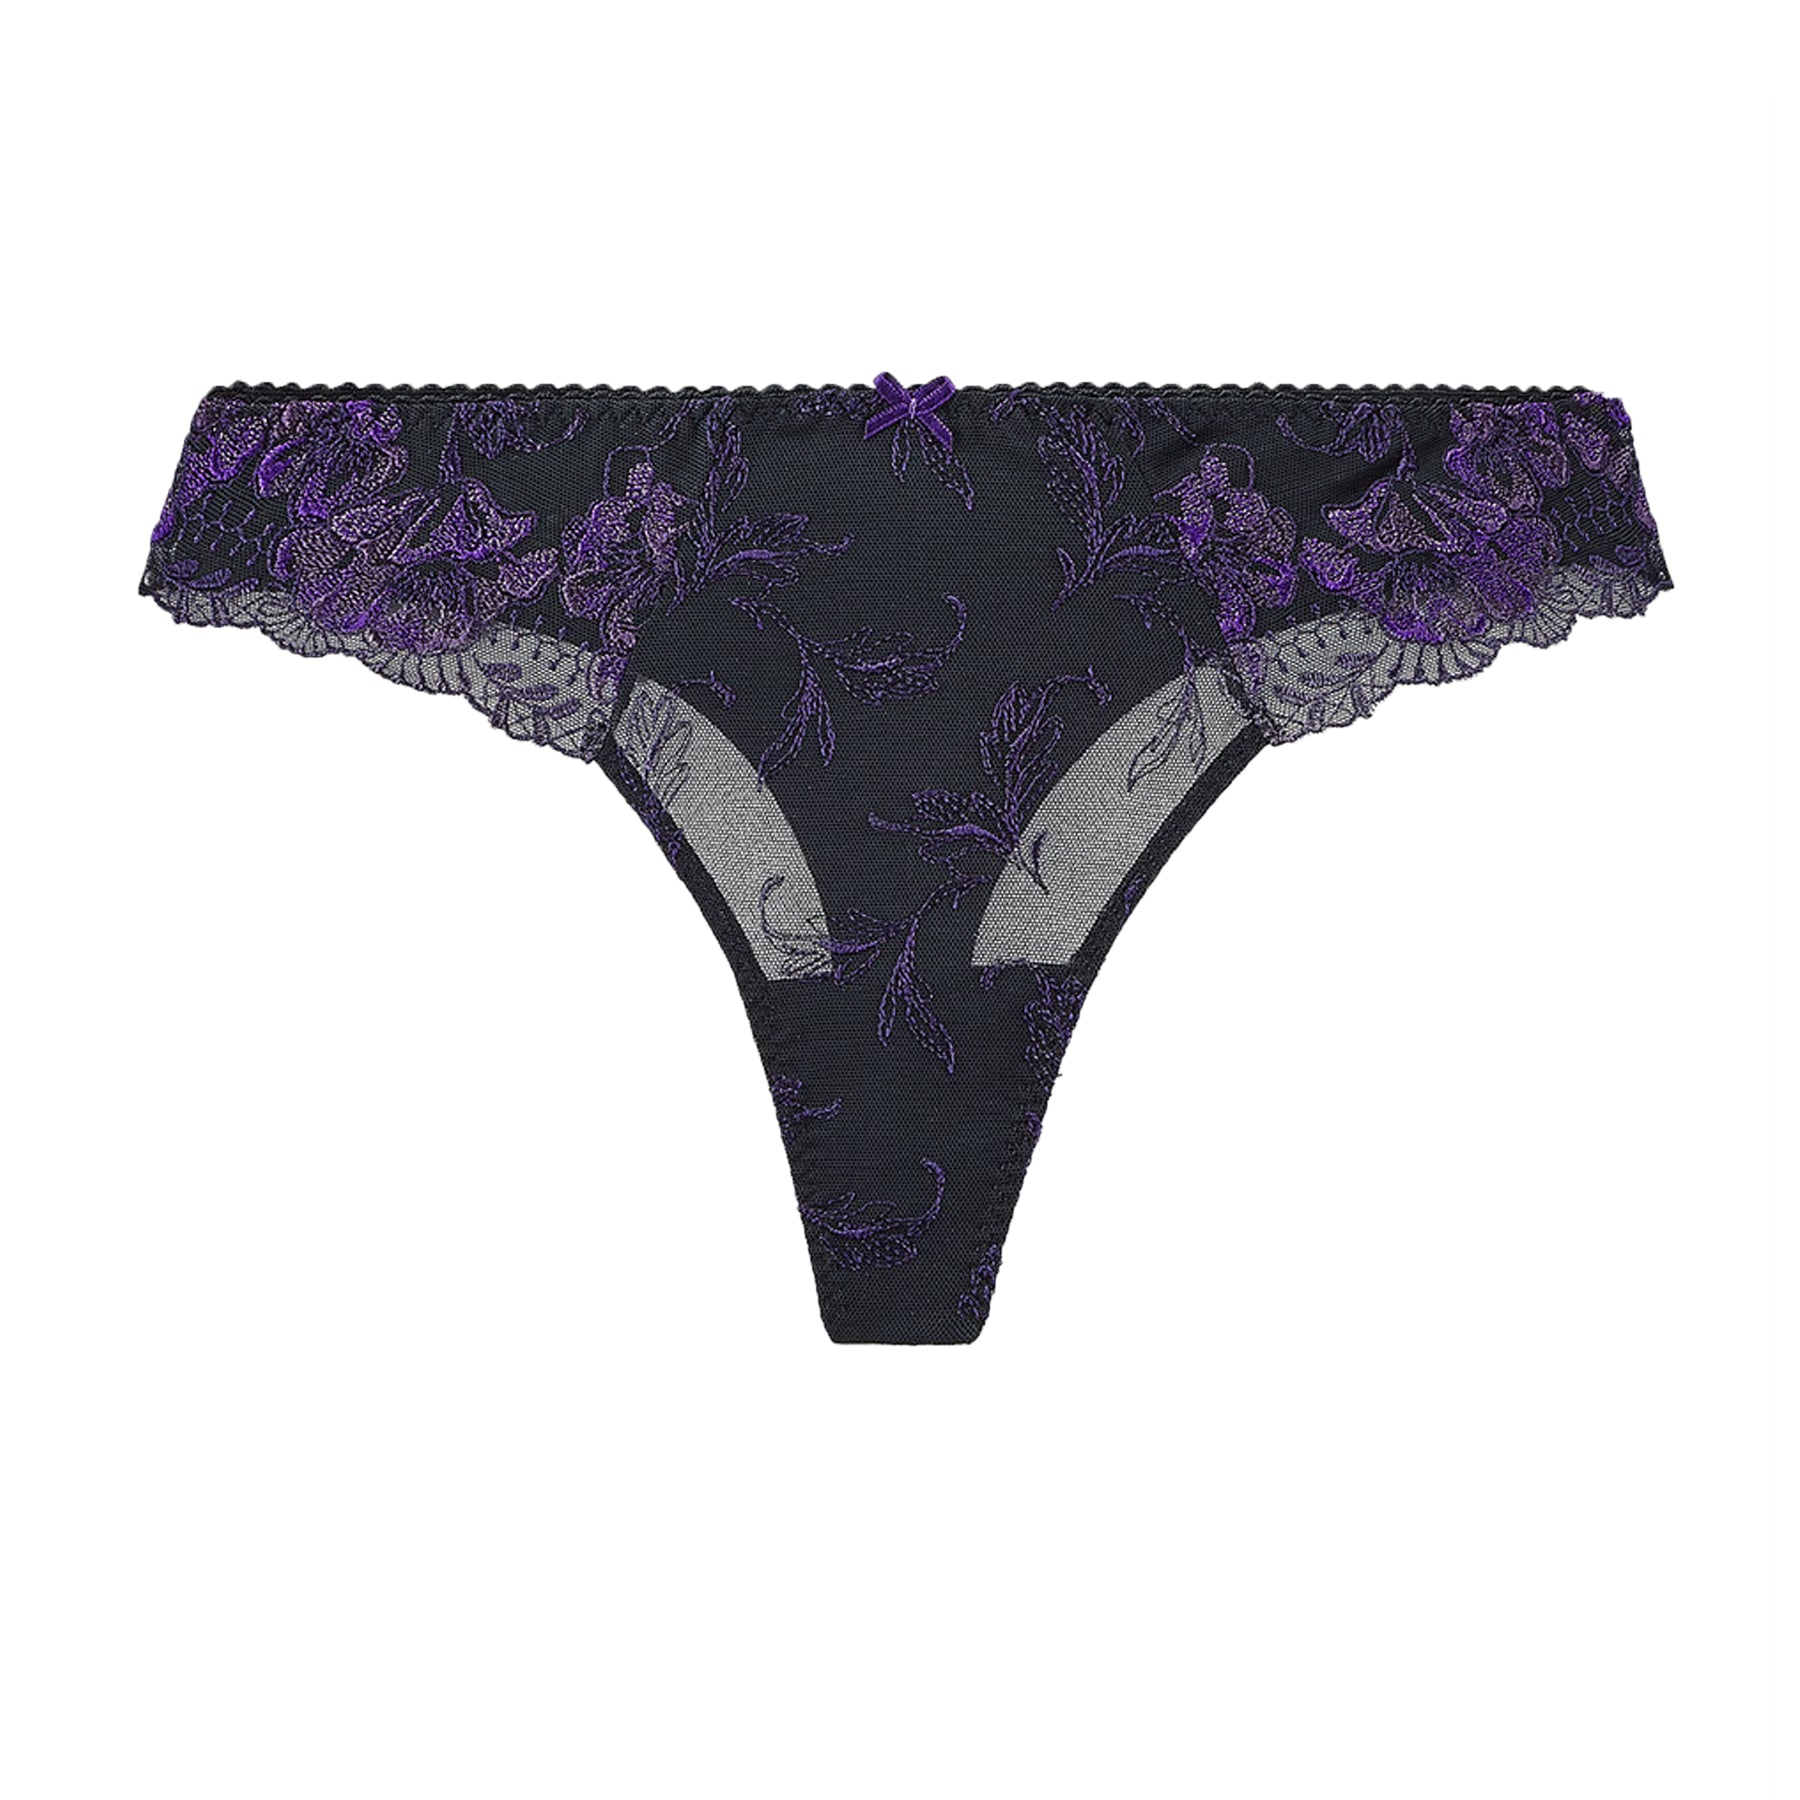 Buy Victoria's Secret Black Lace Trim Cheeky Knickers from Next Luxembourg